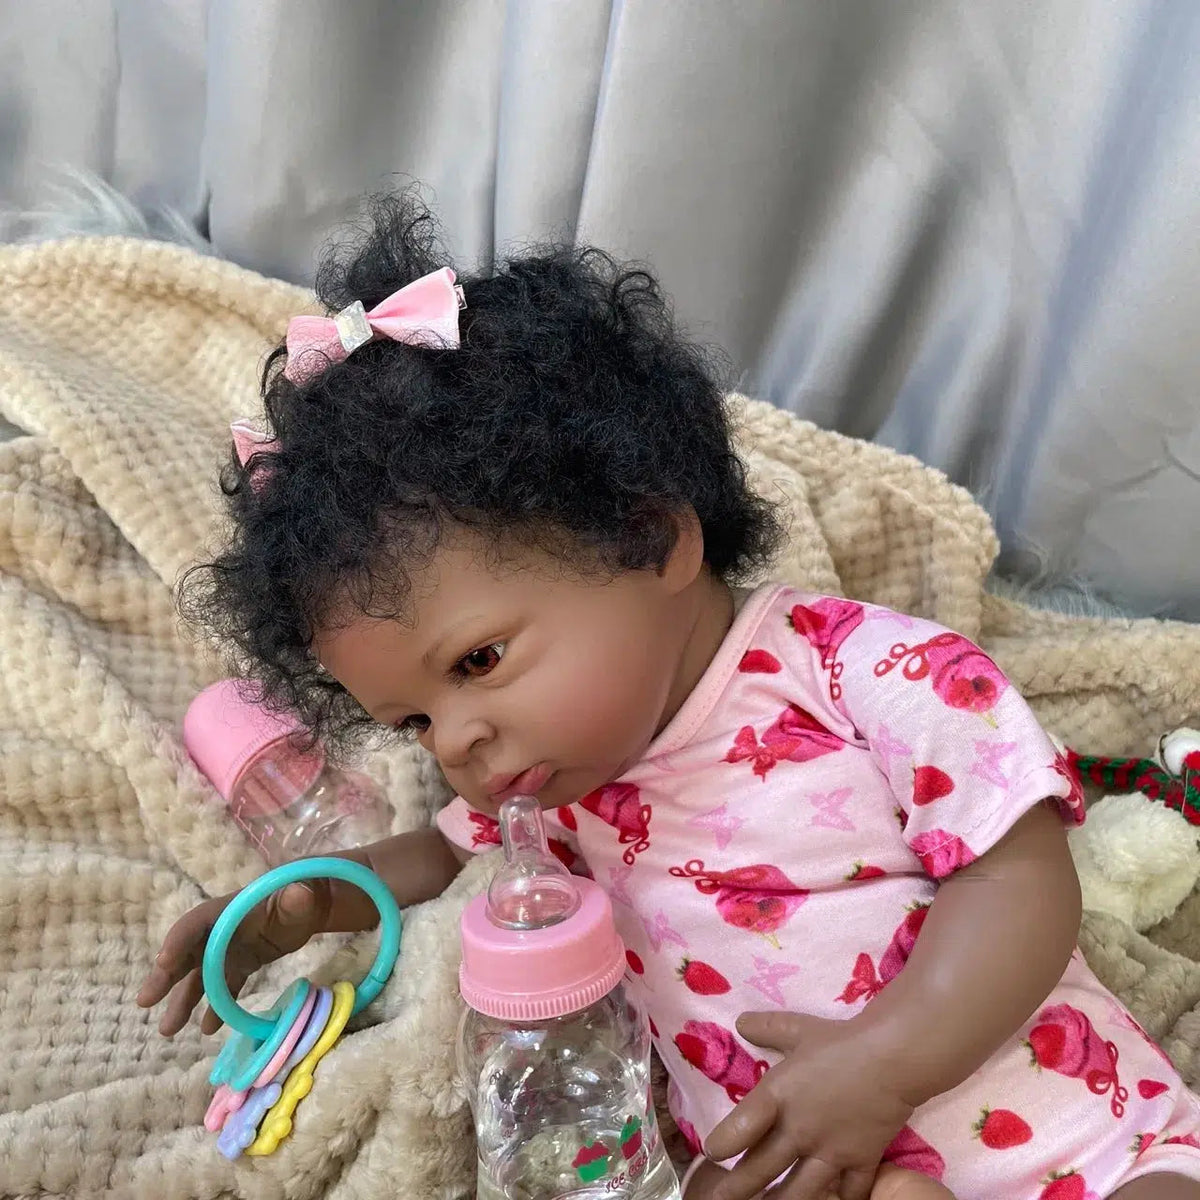 20Inch Finished African American Doll Lanny Black Skin Reborn Baby Newborn With Rooted Hair Handmade Toy Gift For Girls-Maternity Miracles - Mom & Baby Gifts